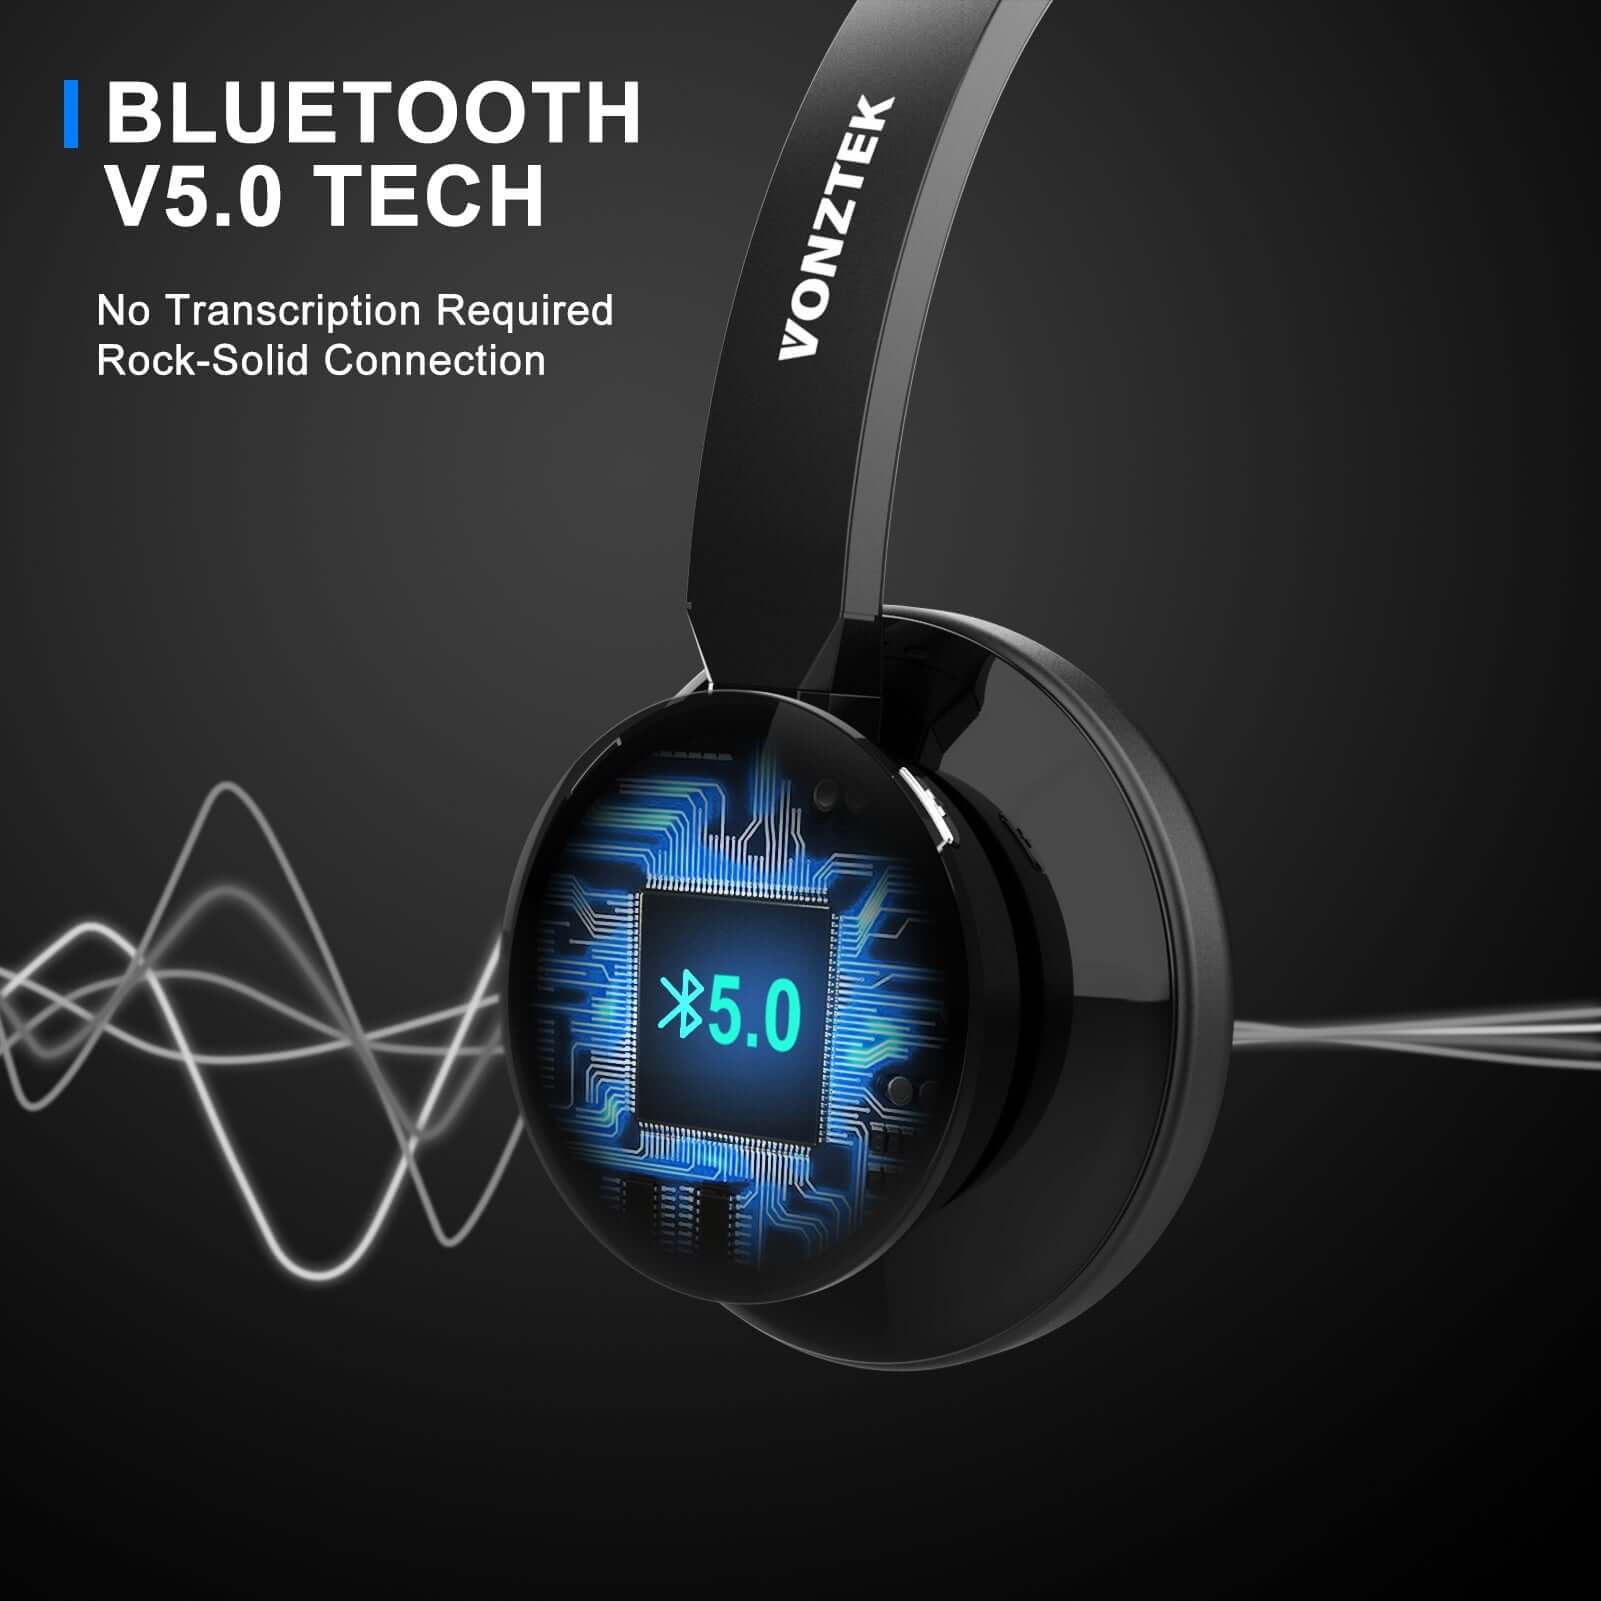 Bluetooth V5.0 Tech,No transcription Required,Rock-Solid Connection